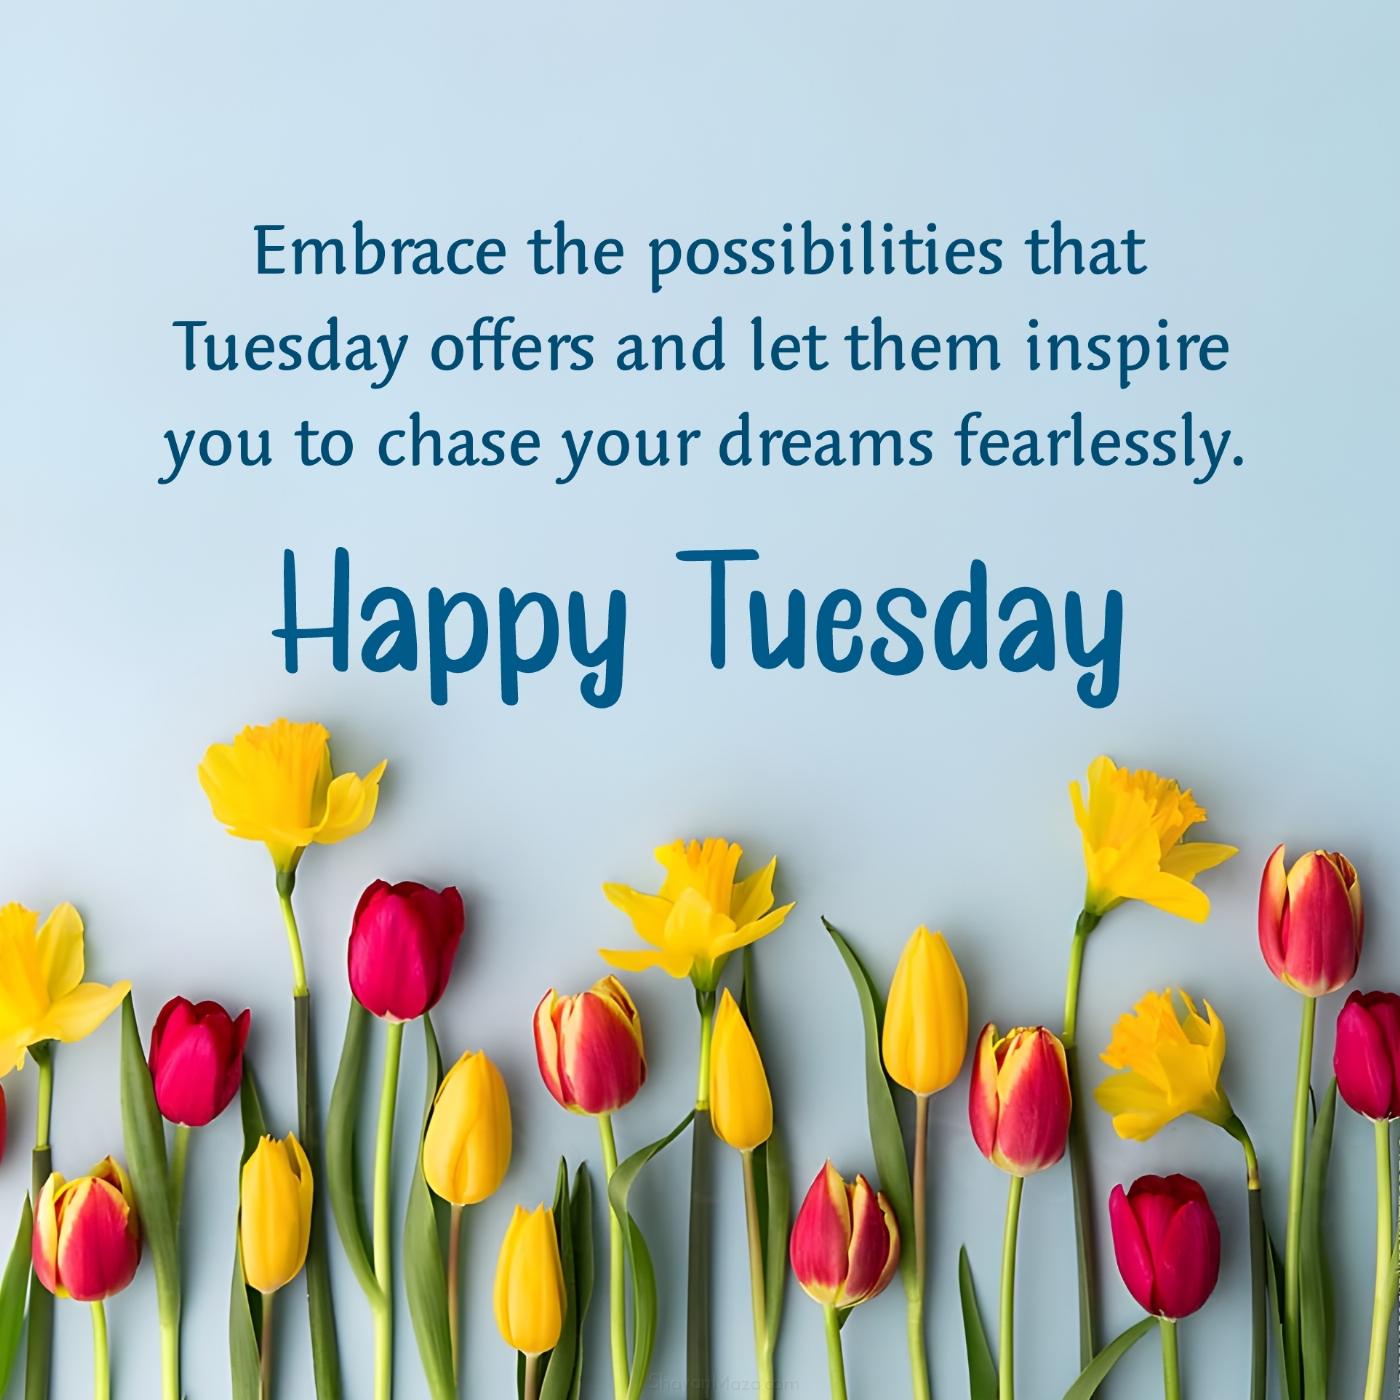 Embrace the possibilities that Tuesday offers and let them inspire you